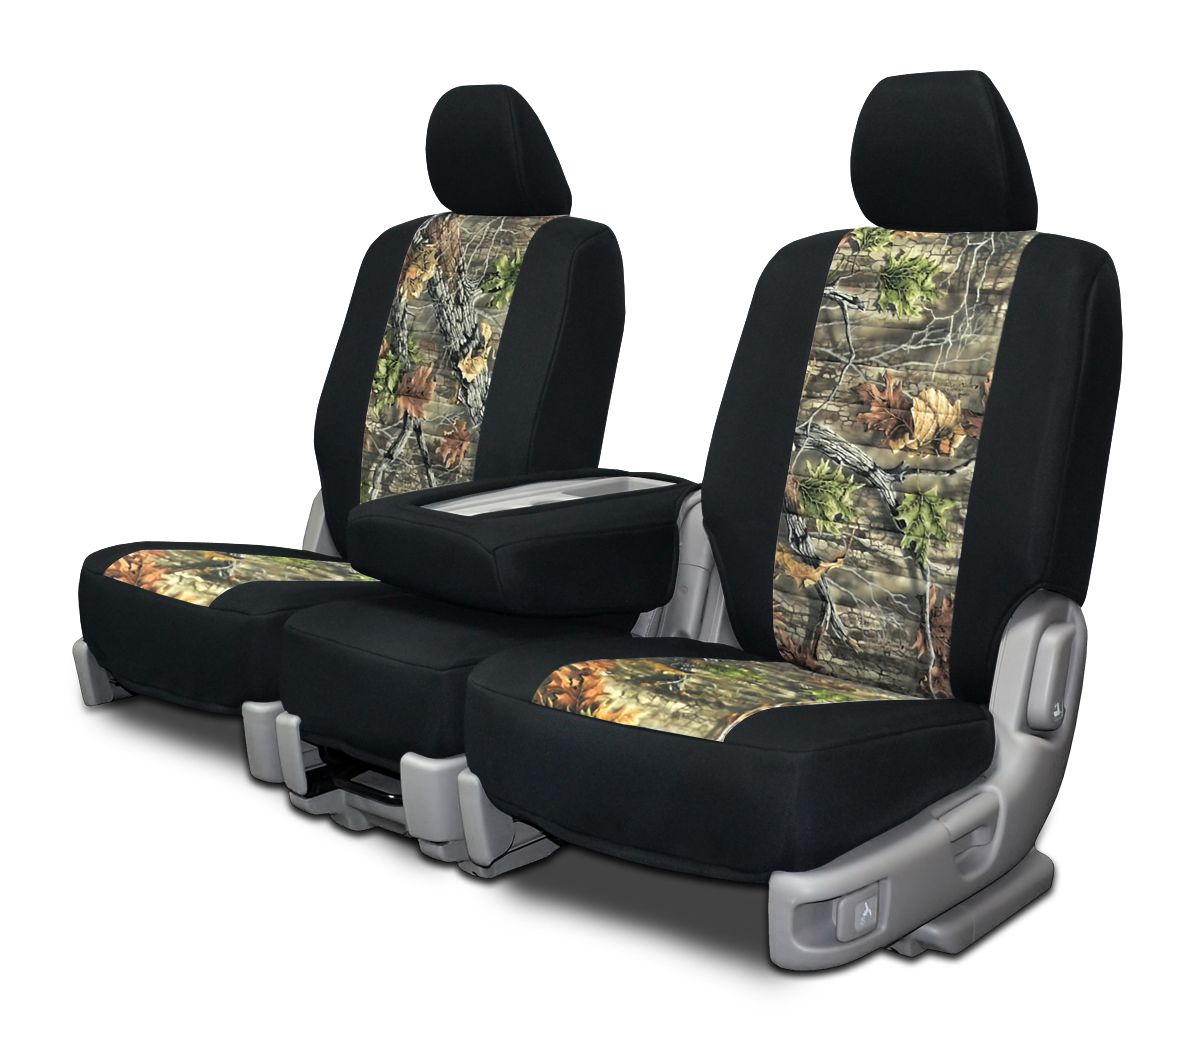 Custom Fit Neo-Camo Seat Covers for Toyota Pickup | eBay